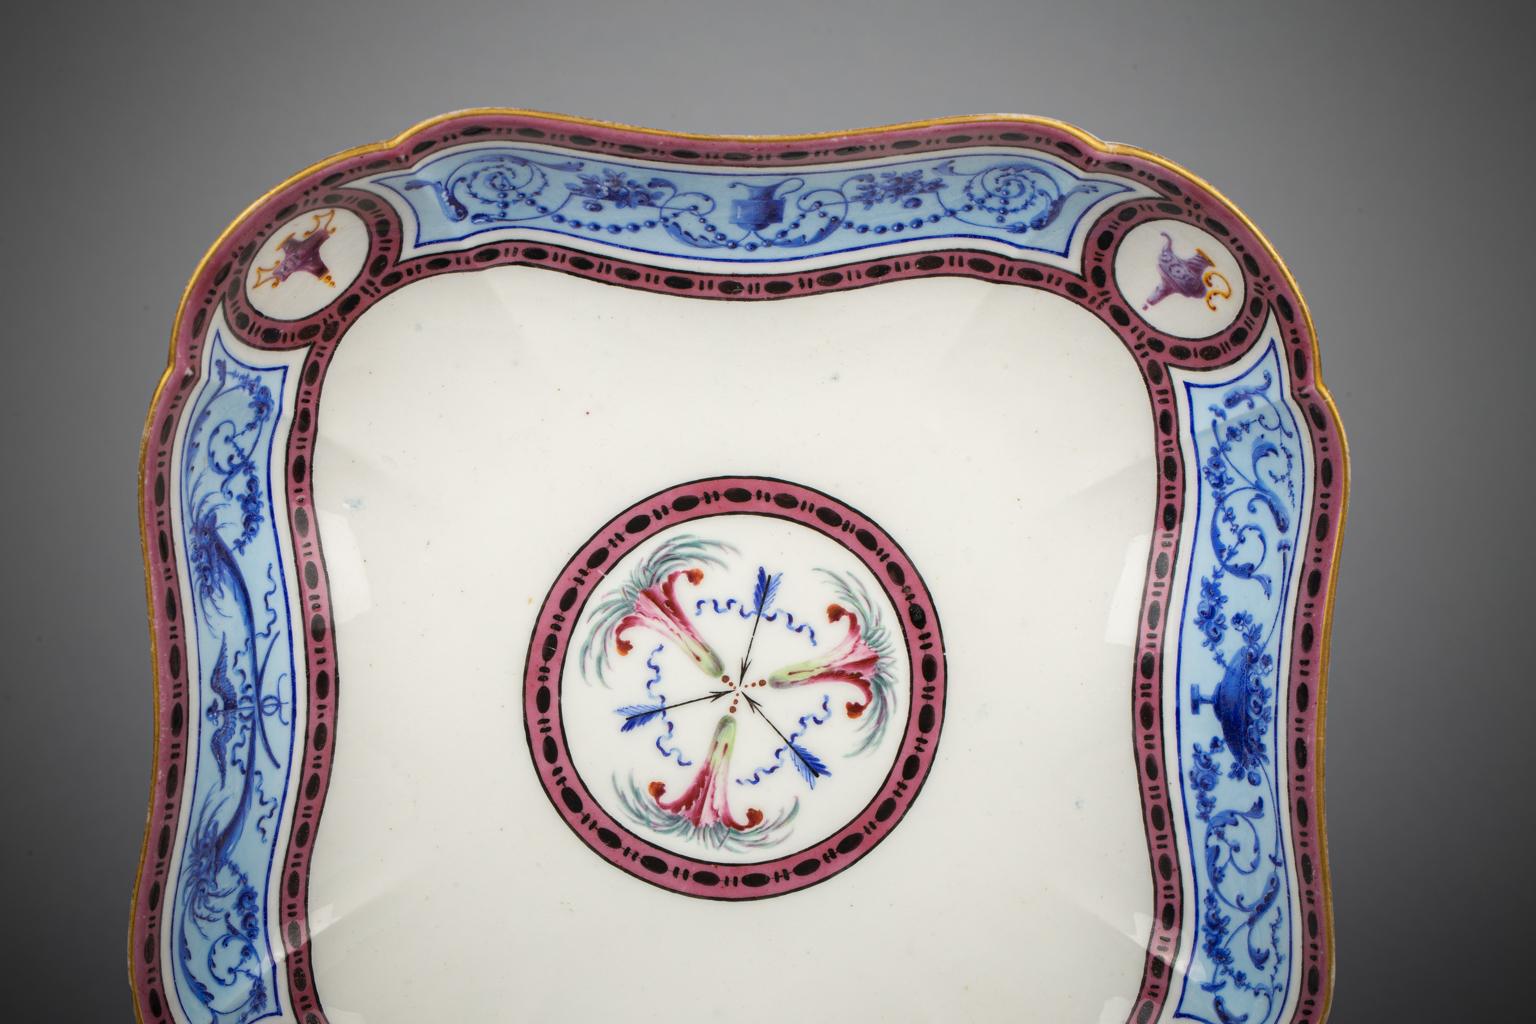 French Porcelain Square Dessert Dish, Sevres, Dated 1790 In Good Condition For Sale In New York, NY